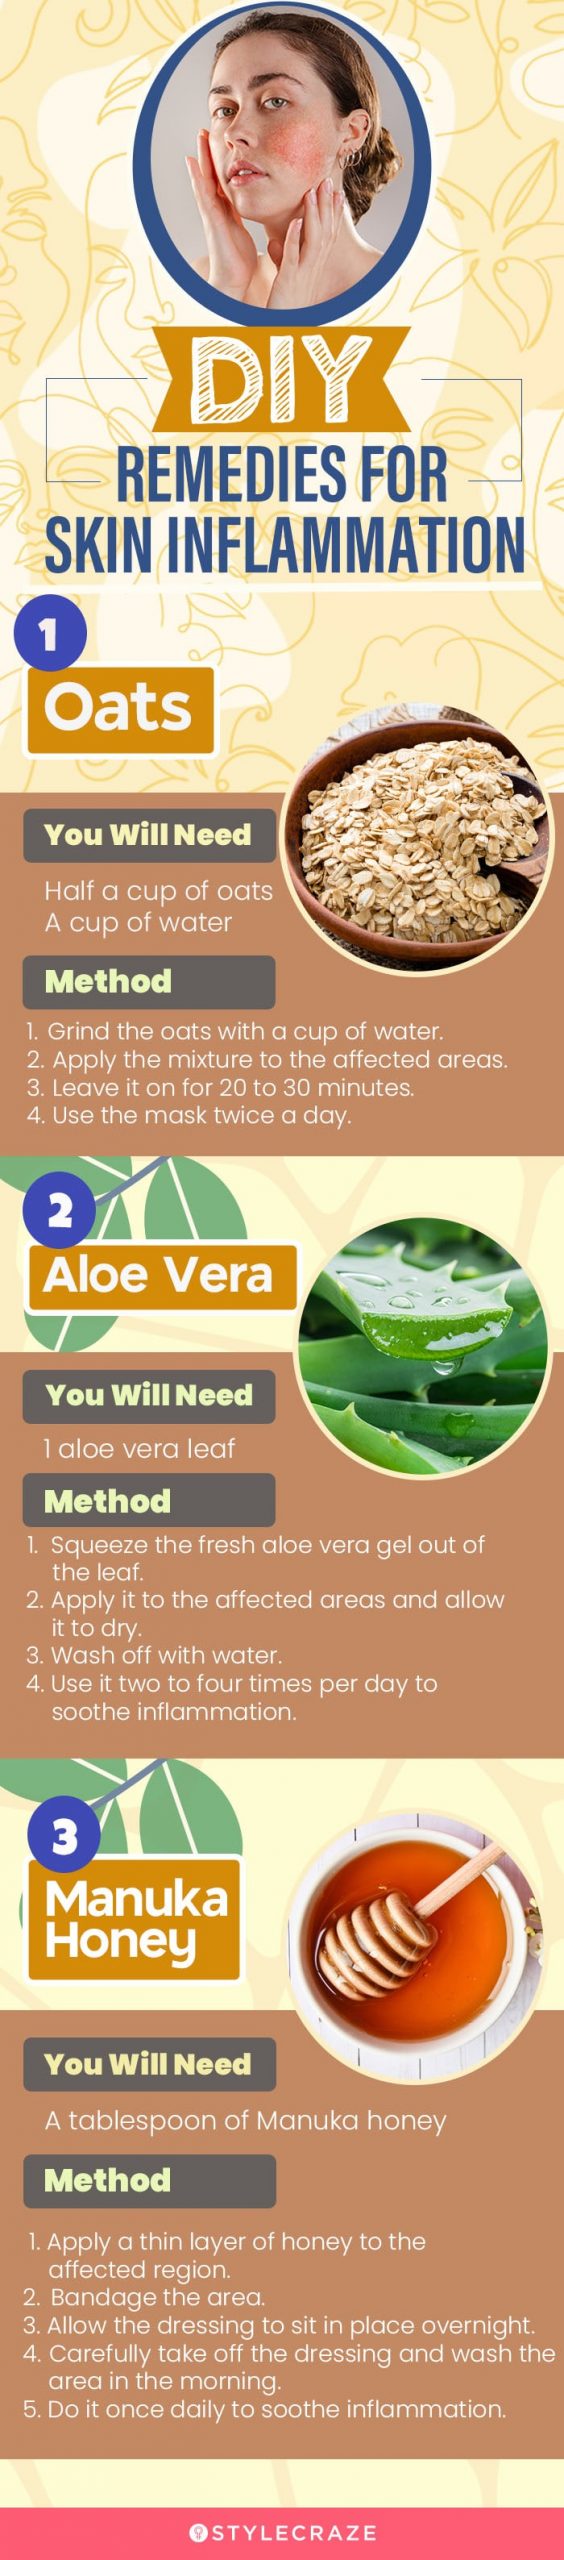 diy remedies for skin inflammation (infographic)